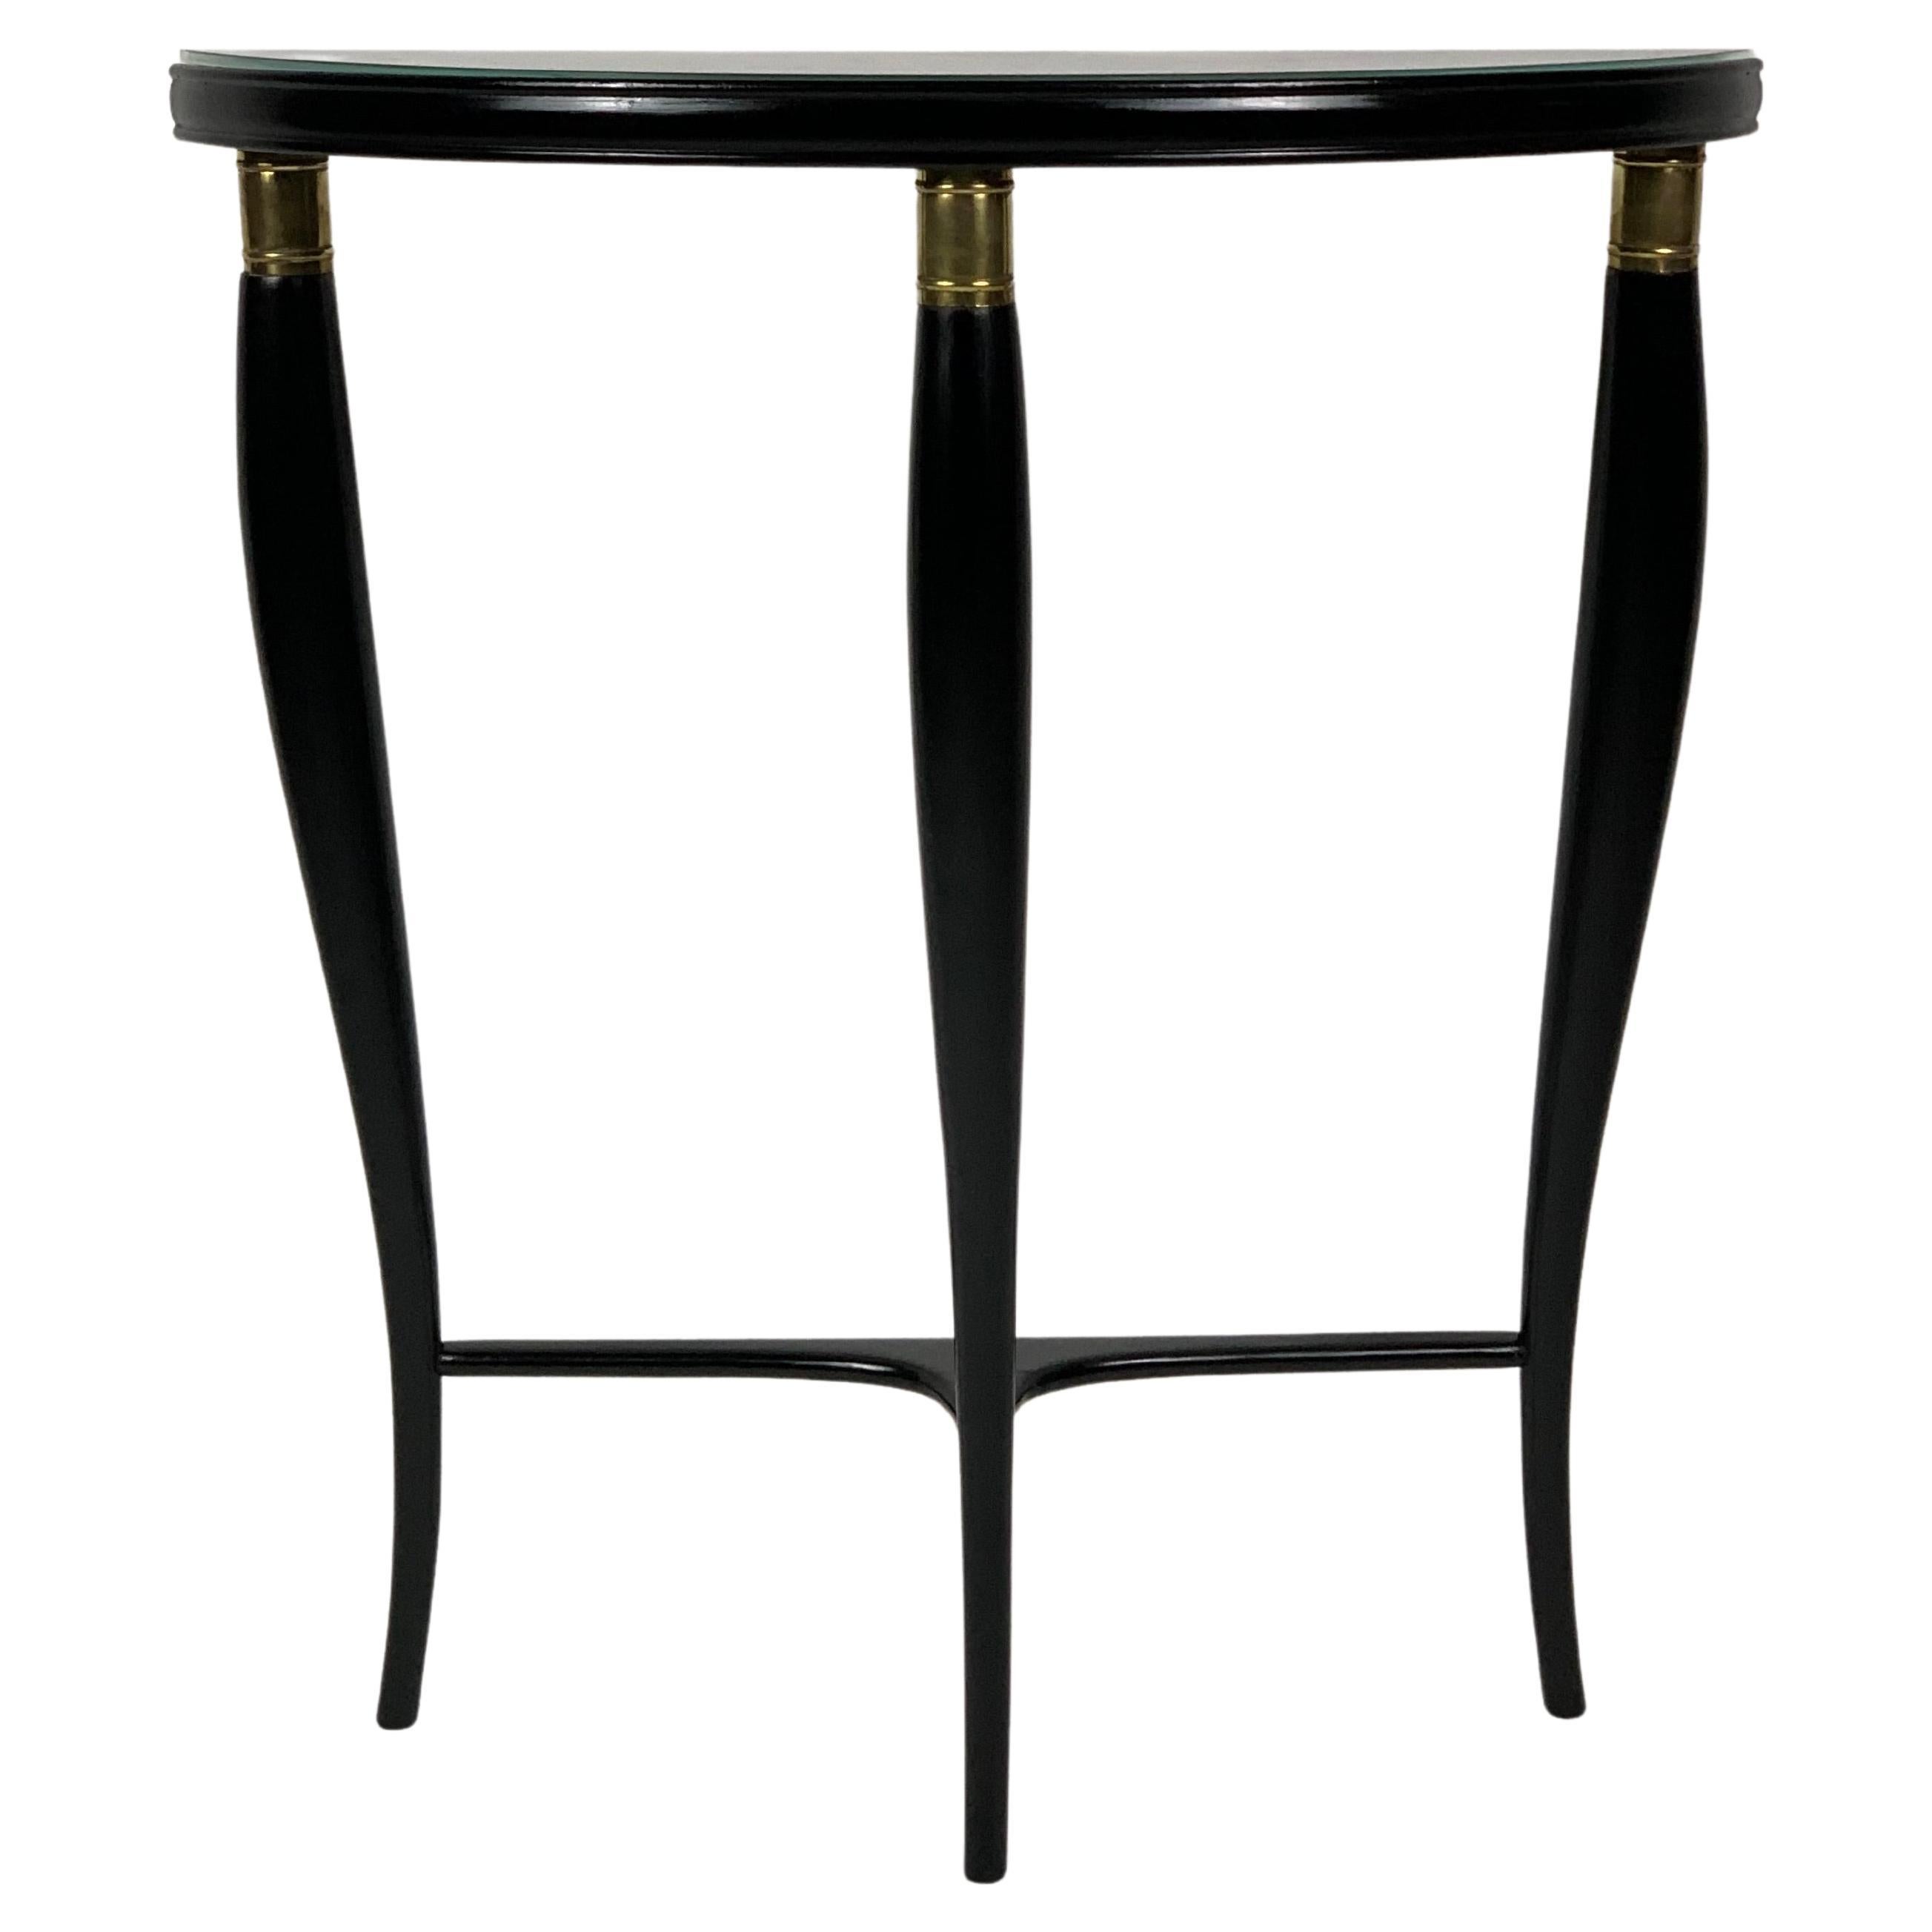 Mid Century Italian console table with three curved shaped legs that taper towards the bottom, connected by a horizontal element. The apex of these three legs are finished and enriched by a sort of cylindrical brass collar.
The three legs support a